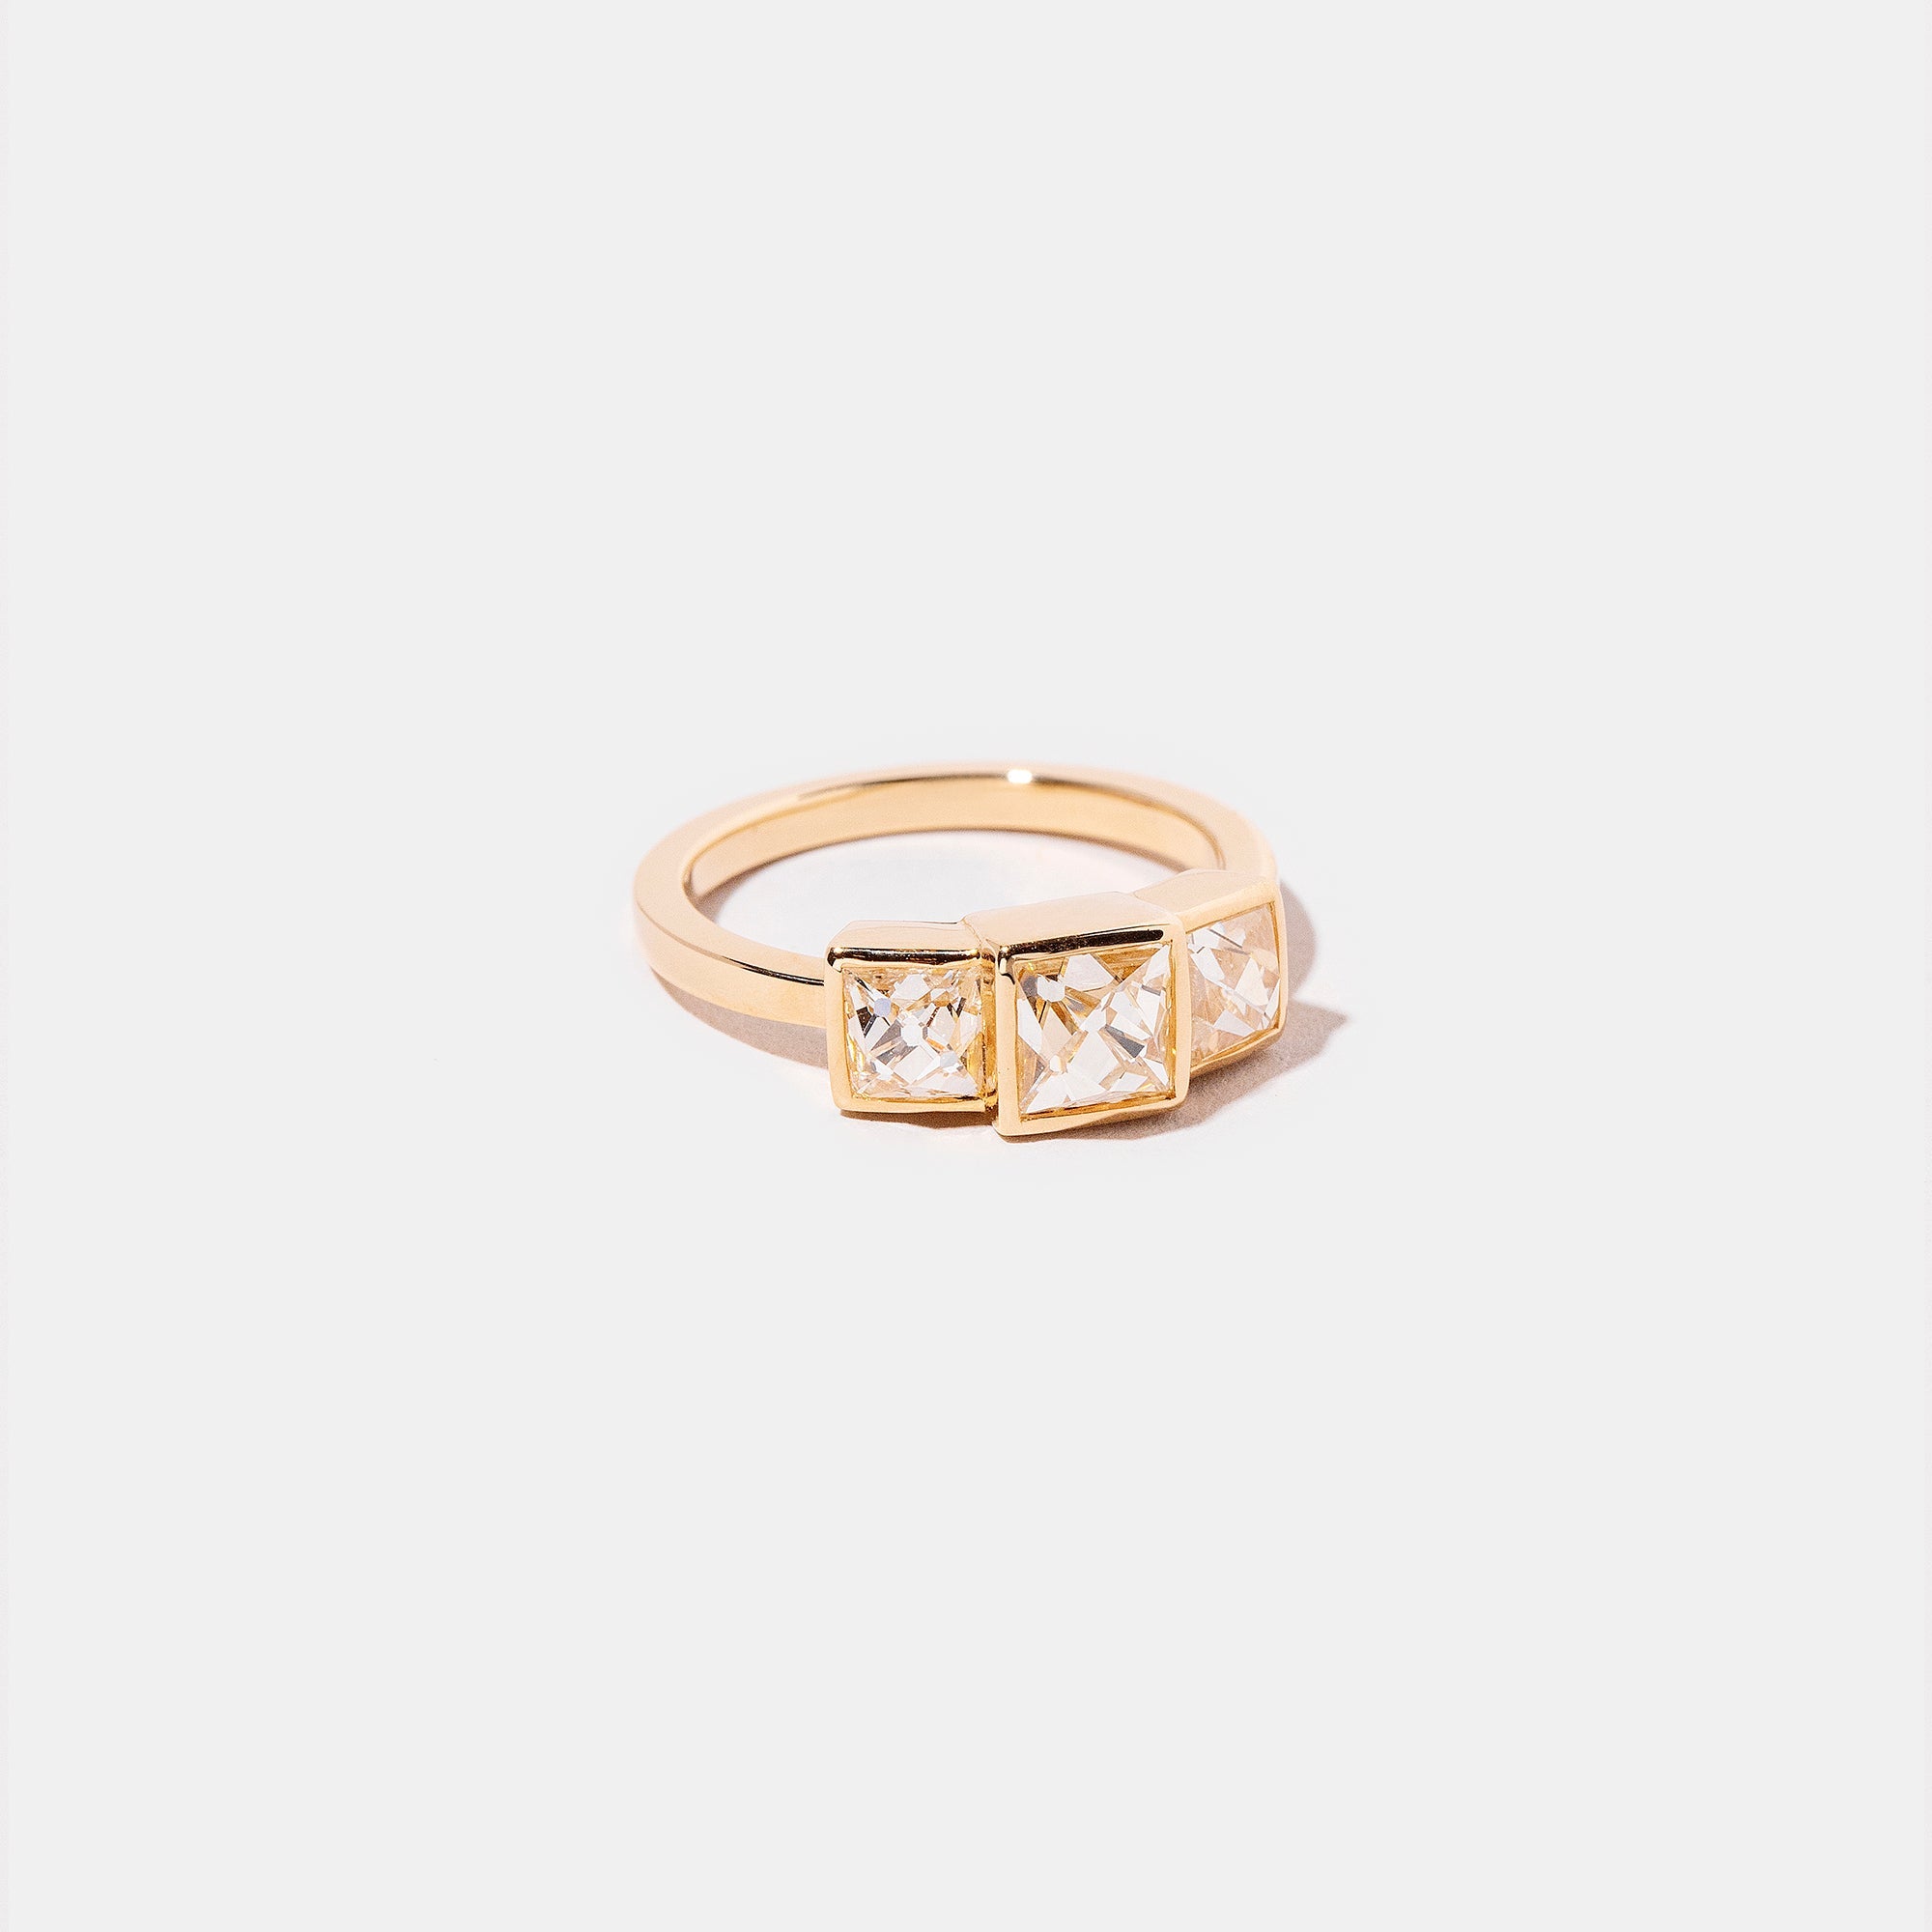 product_details:: Perfect Number Ring on light color background.